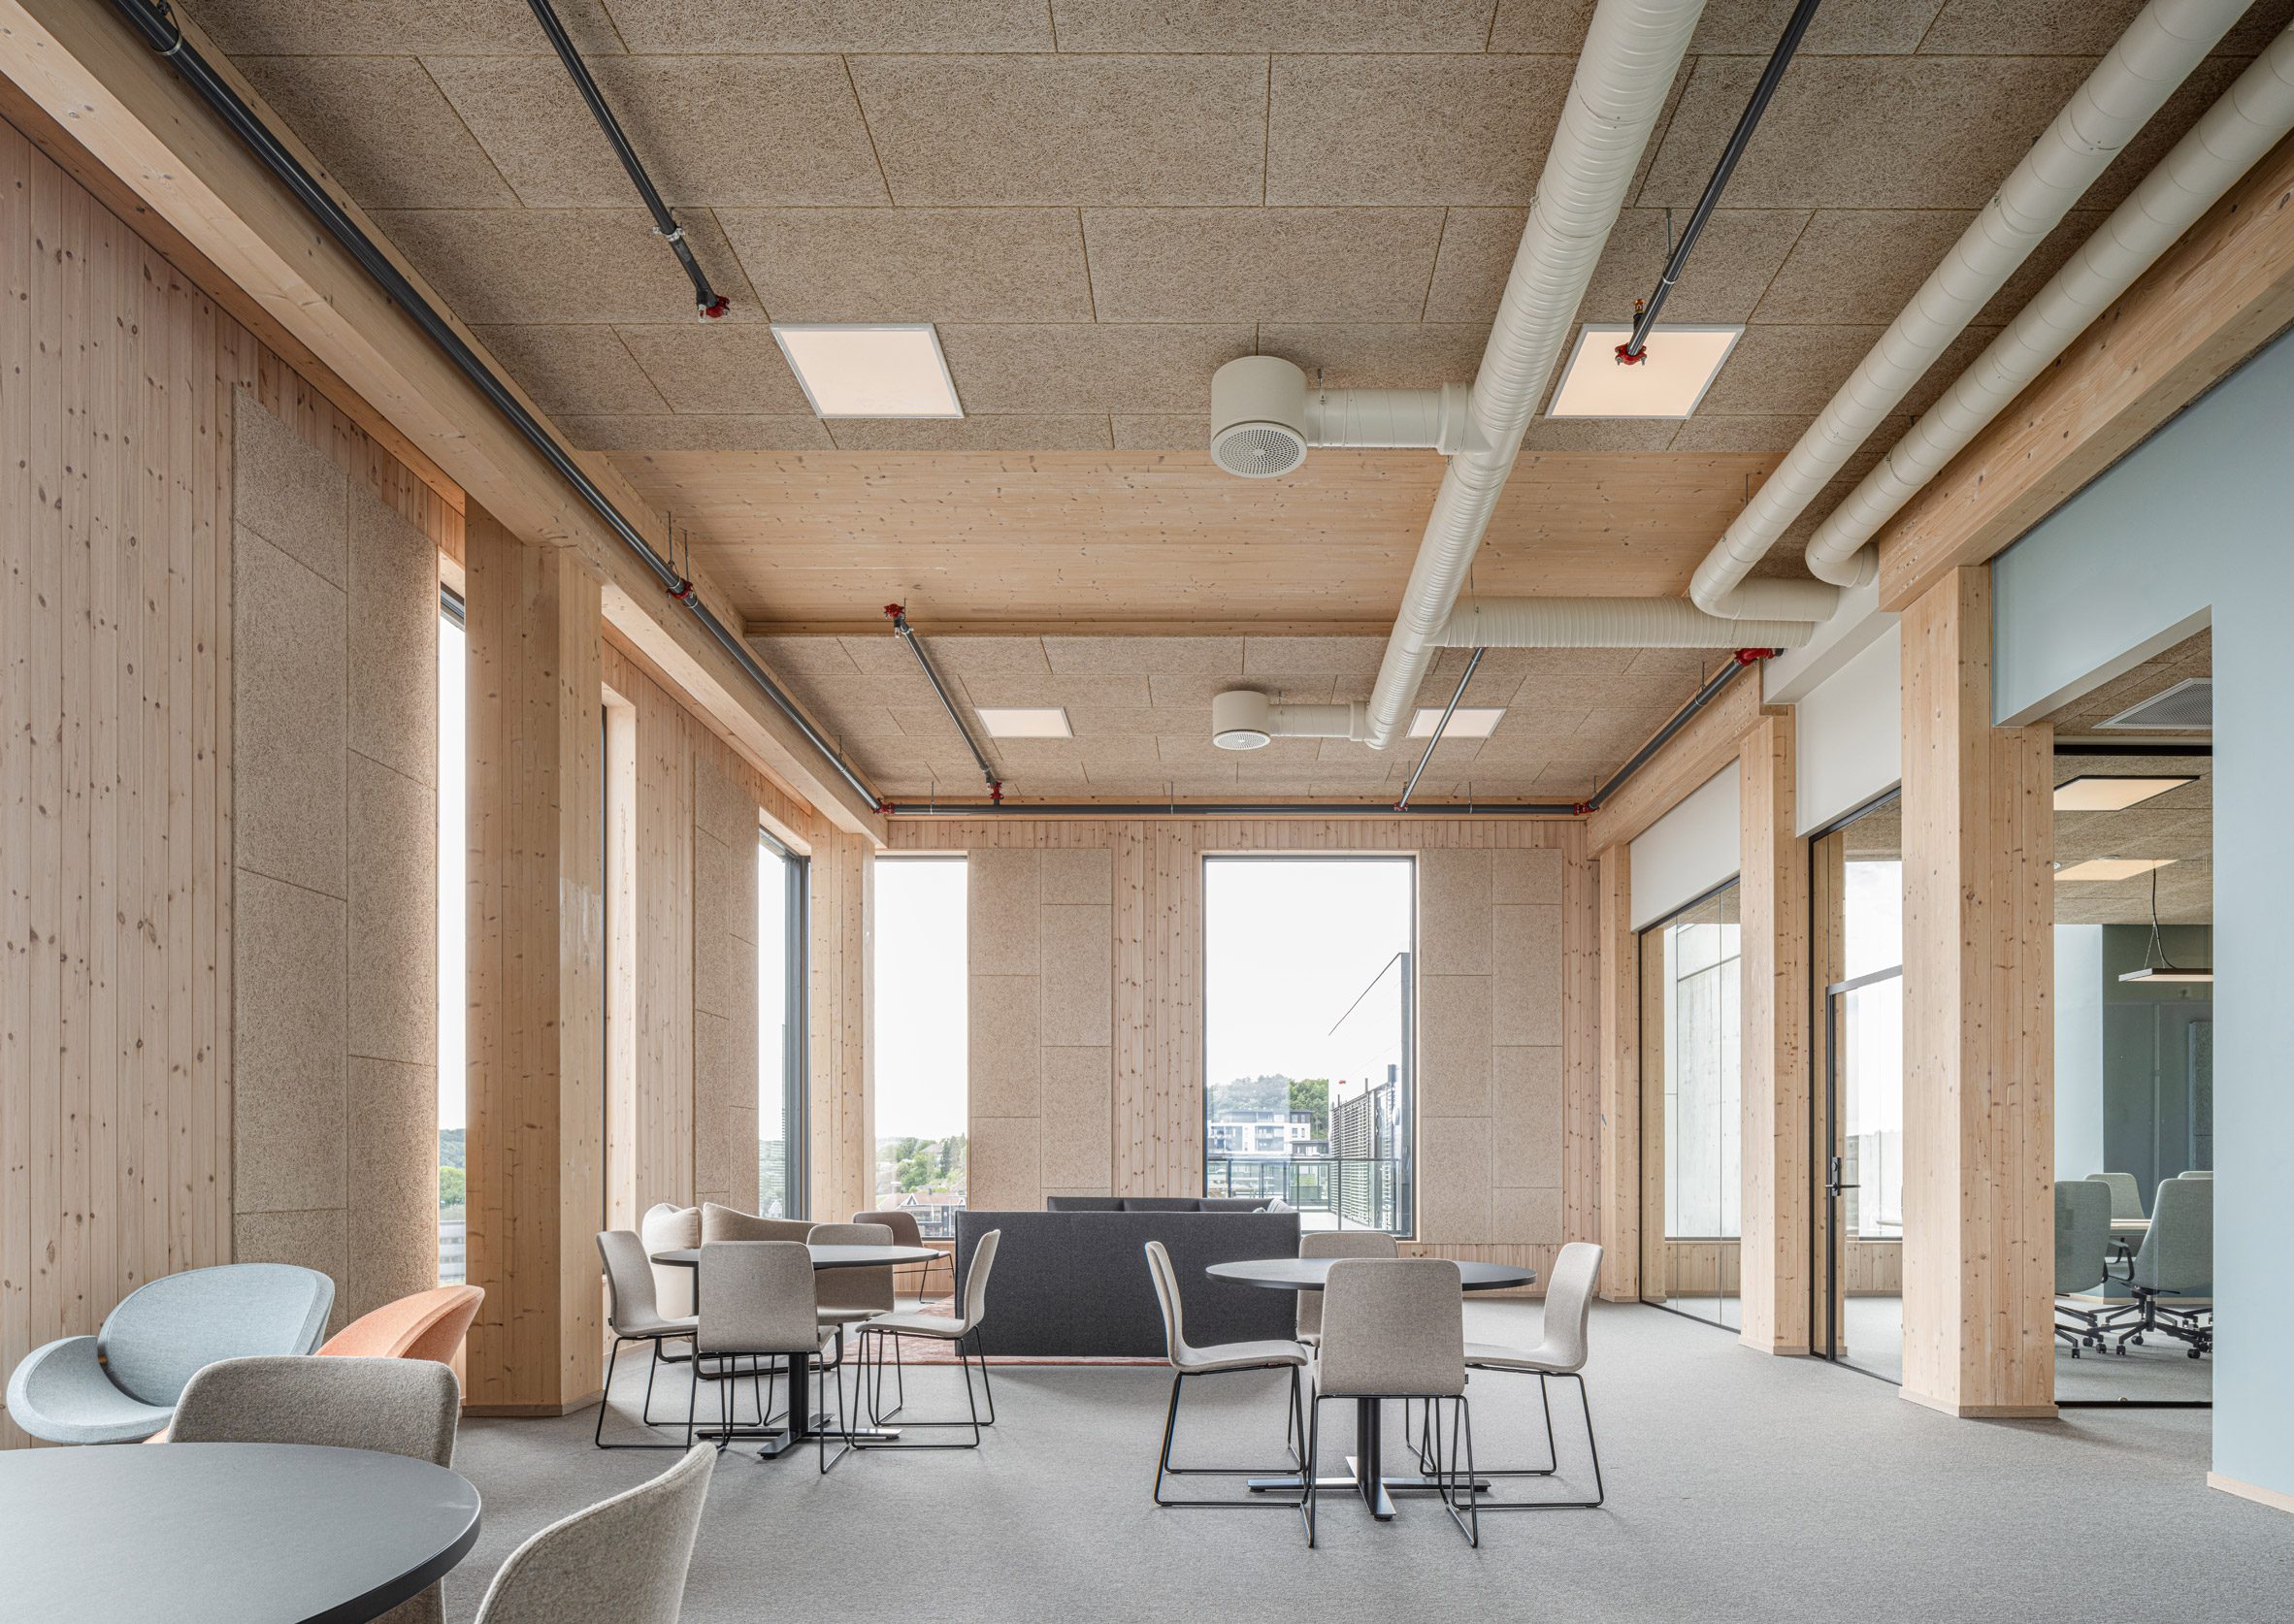 Exposed interiors of the green timber clad office in Norway by Oslotre